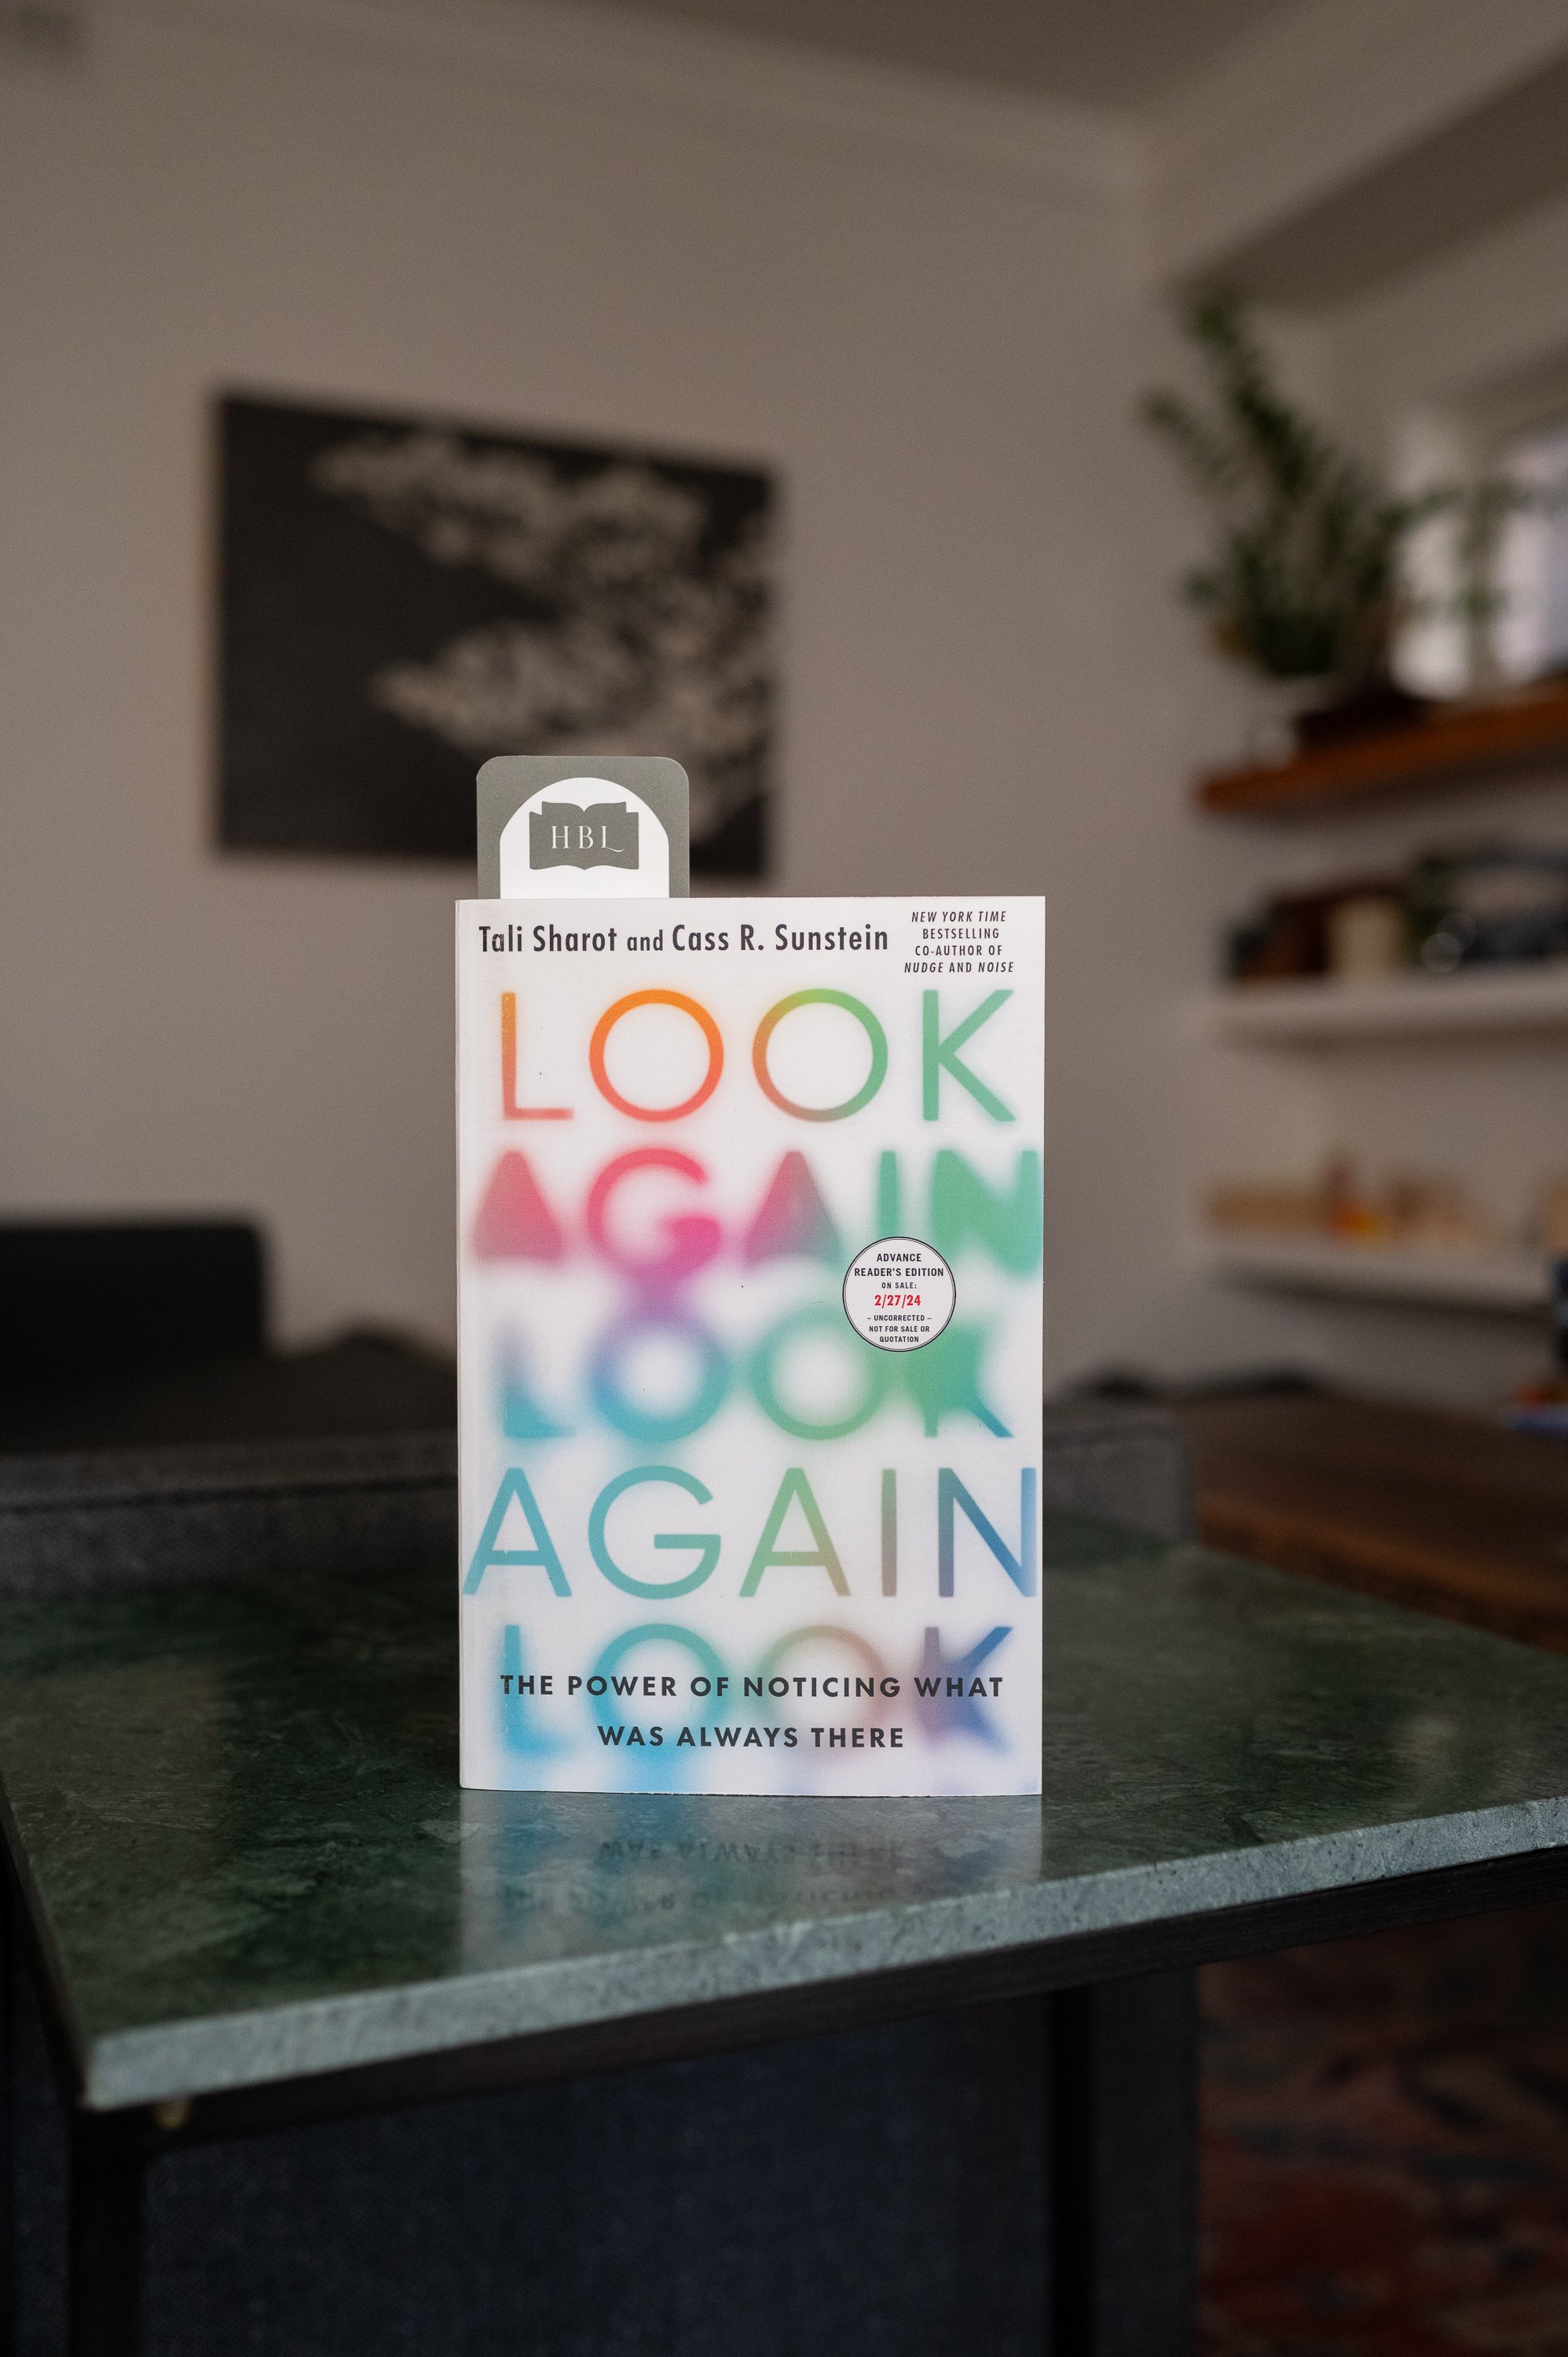 Look Again by Tali Sharot and Cass R. Sunstein